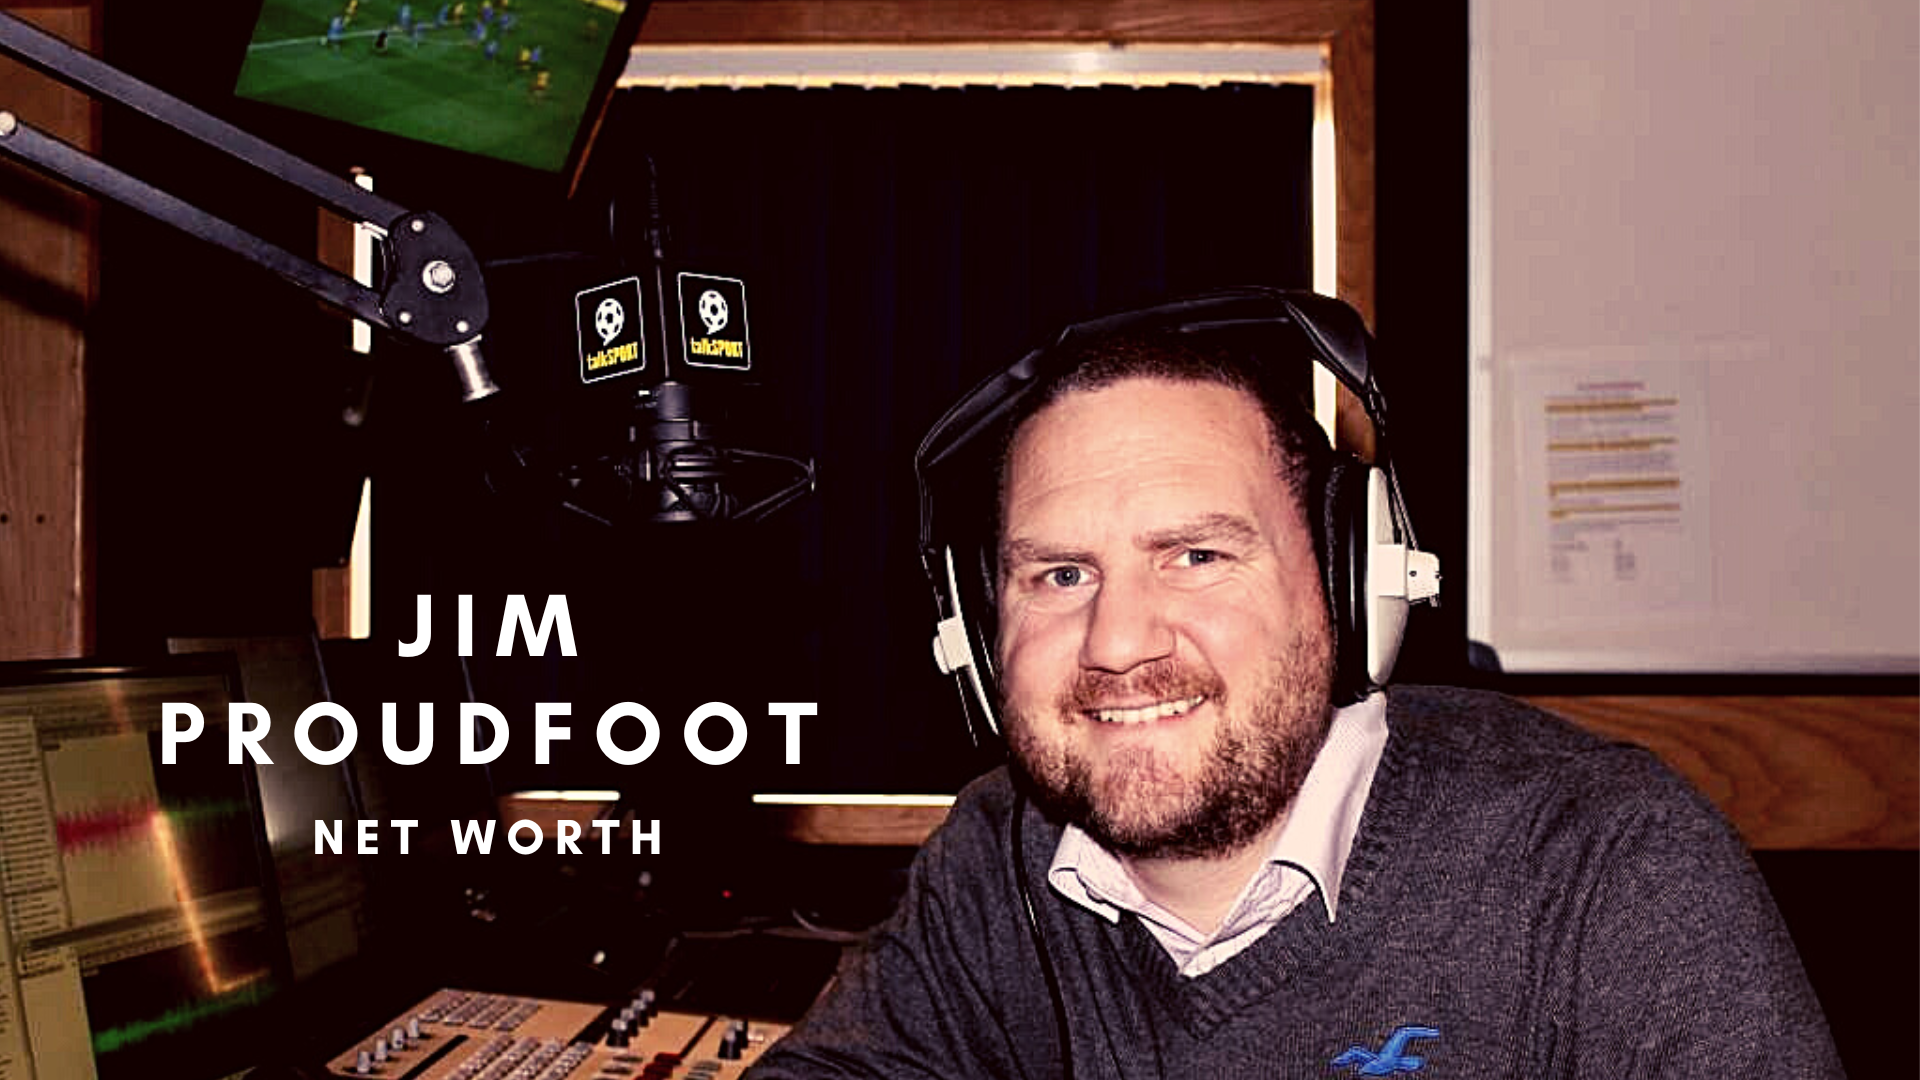 Jim Proudfoot 2022 - Net Worth, Wife, Salary, Endorsements, Current Job, and more